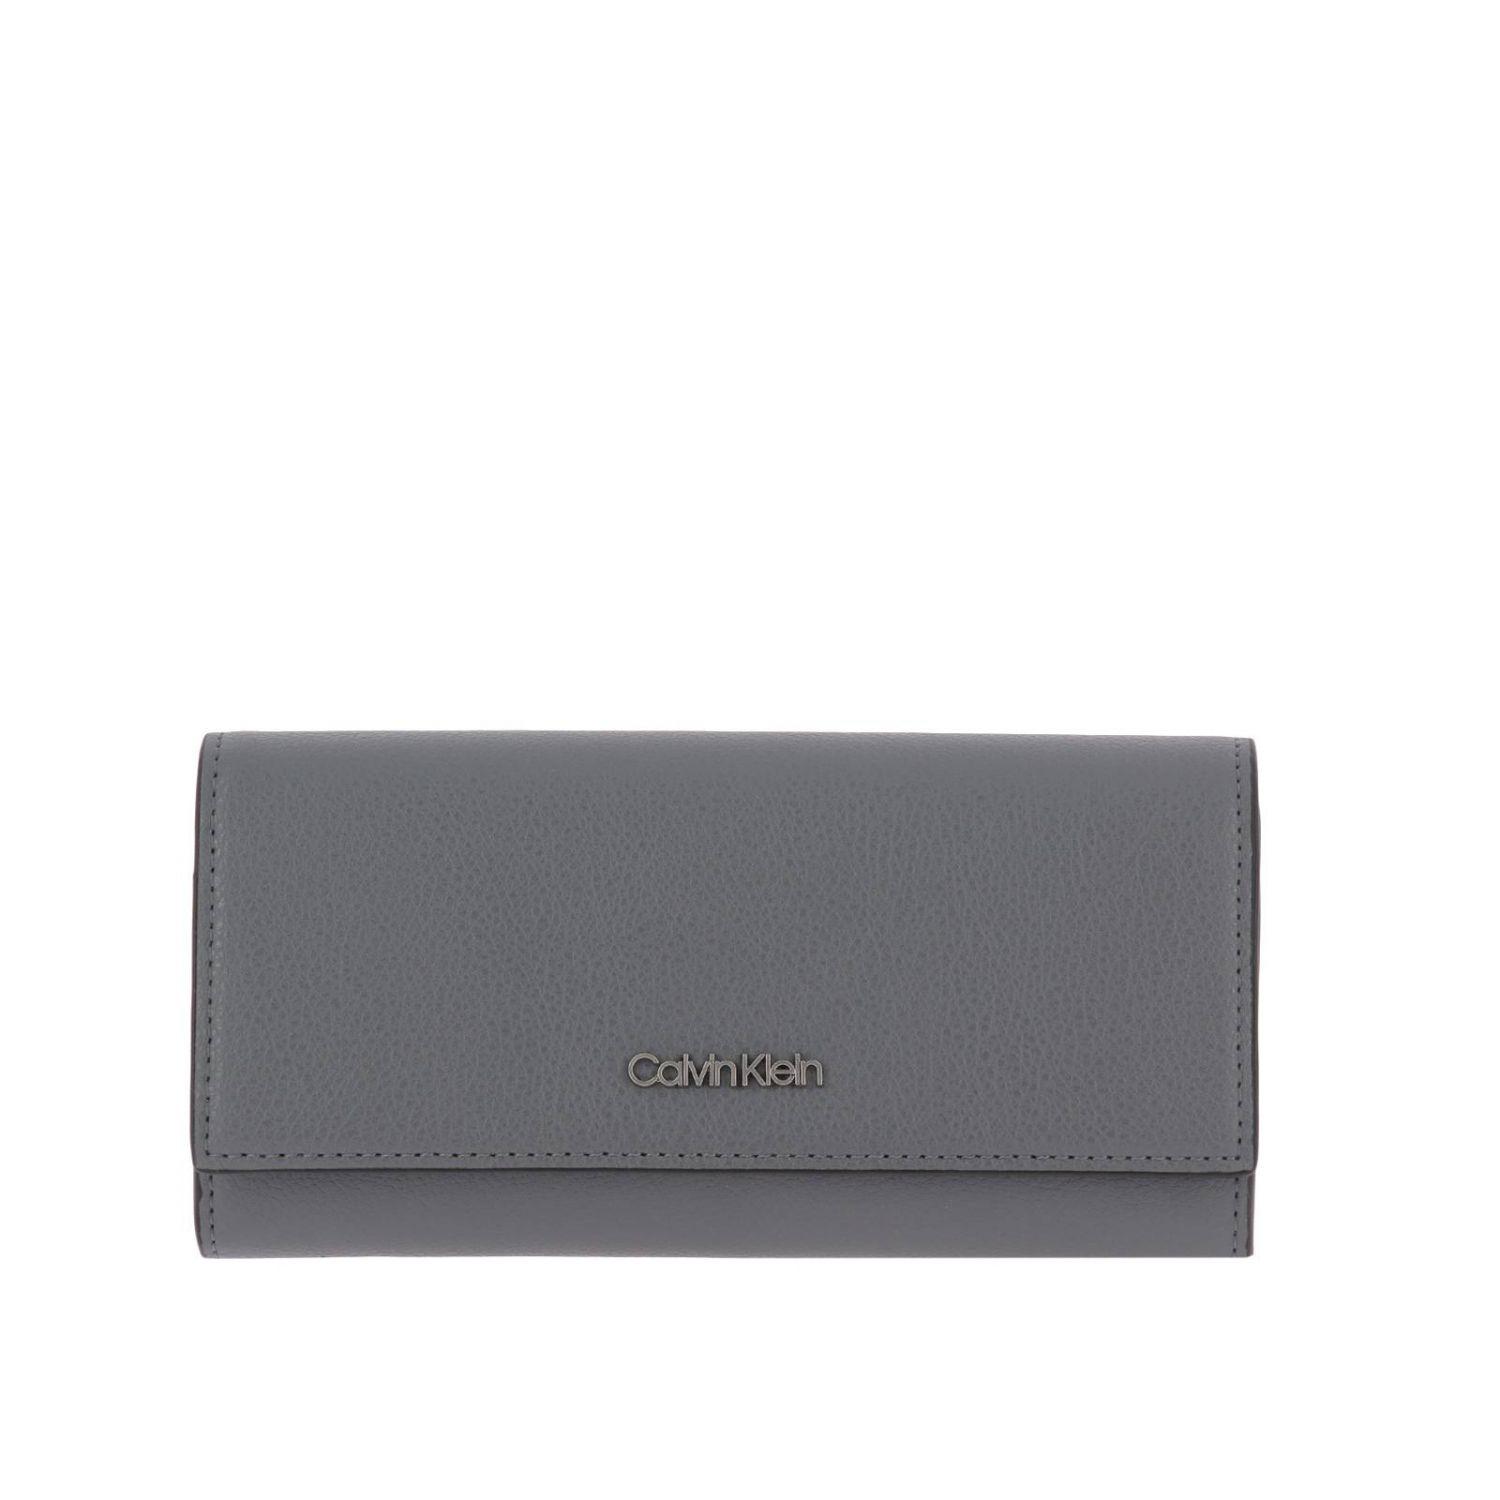 Calvin Klein Small Wallet Women's Discounts Dealers, 59% OFF |  maikyaulaw.com